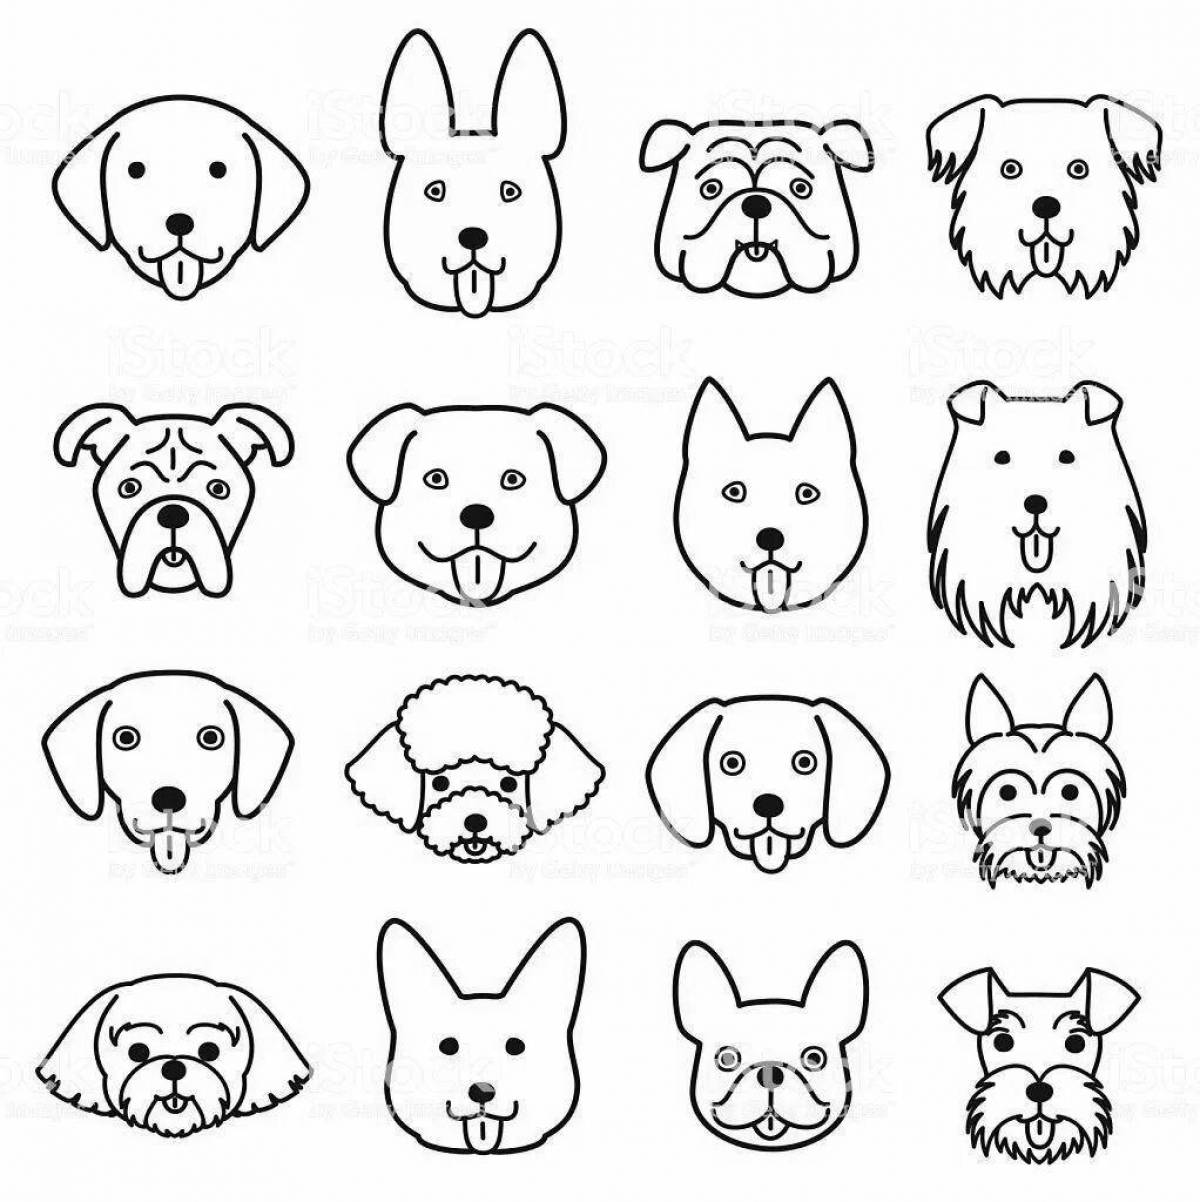 Coloring page dazzling dog face